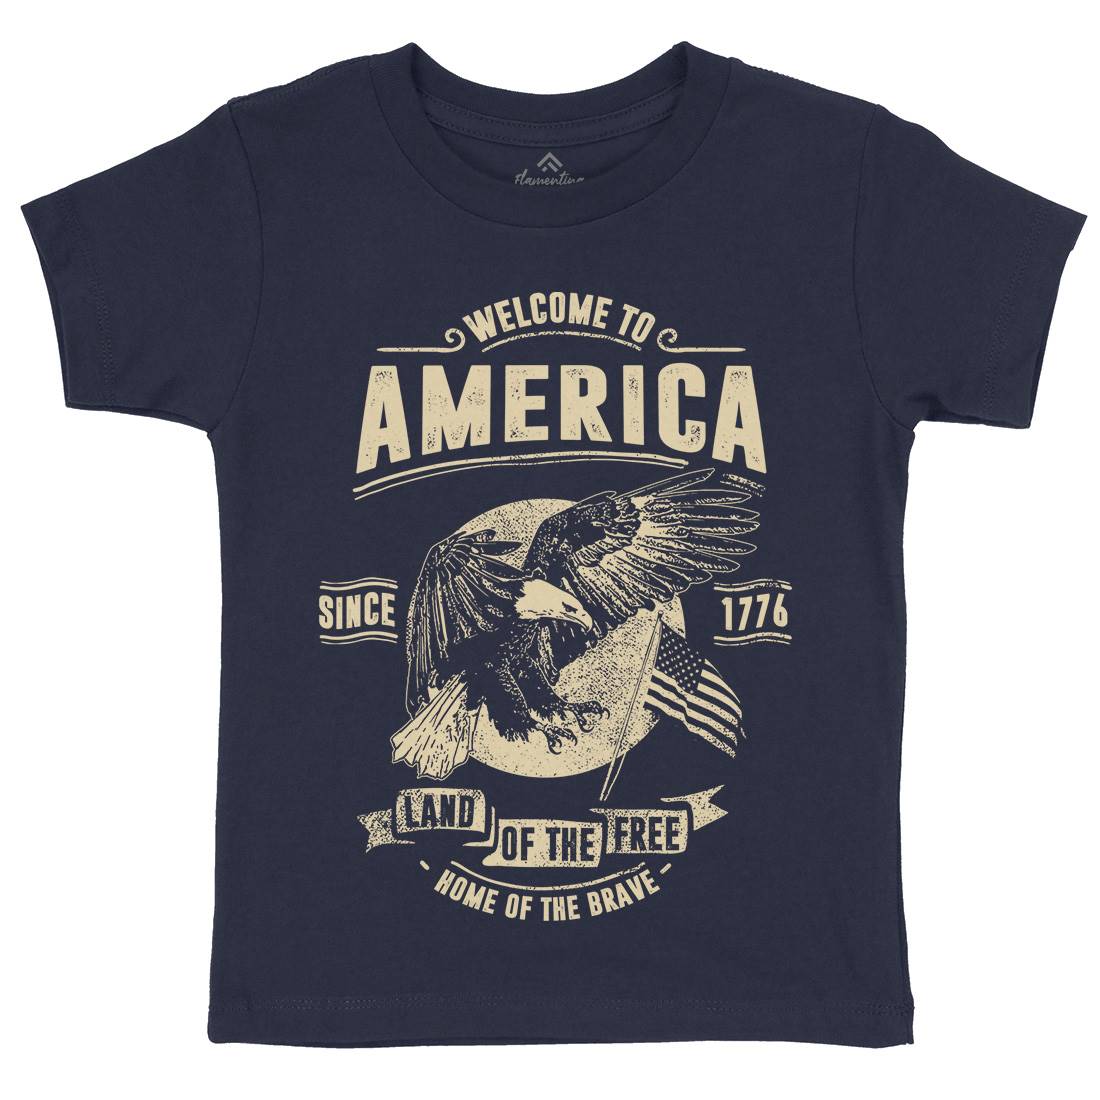 Welcome To America Kids Crew Neck T-Shirt American C994